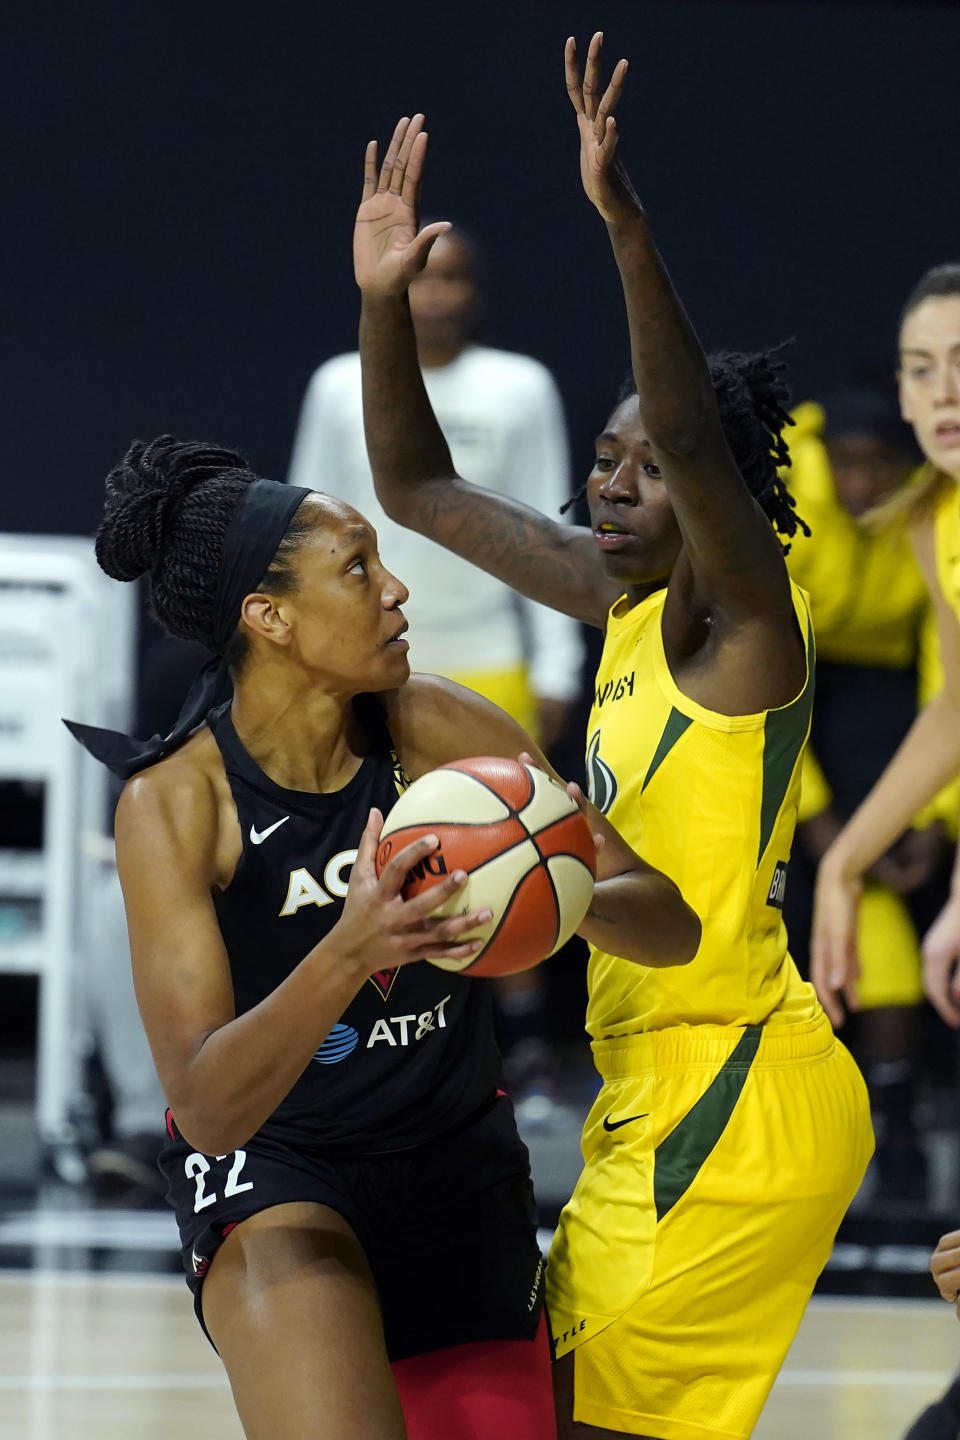 Las Vegas Aces center A'ja Wilson (22) goes up against Seattle Storm forward Natasha Howard (6) during the first half of Game 1 of basketball's WNBA Finals Friday, Oct. 2, 2020, in Bradenton, Fla. (AP Photo/Chris O'Meara)